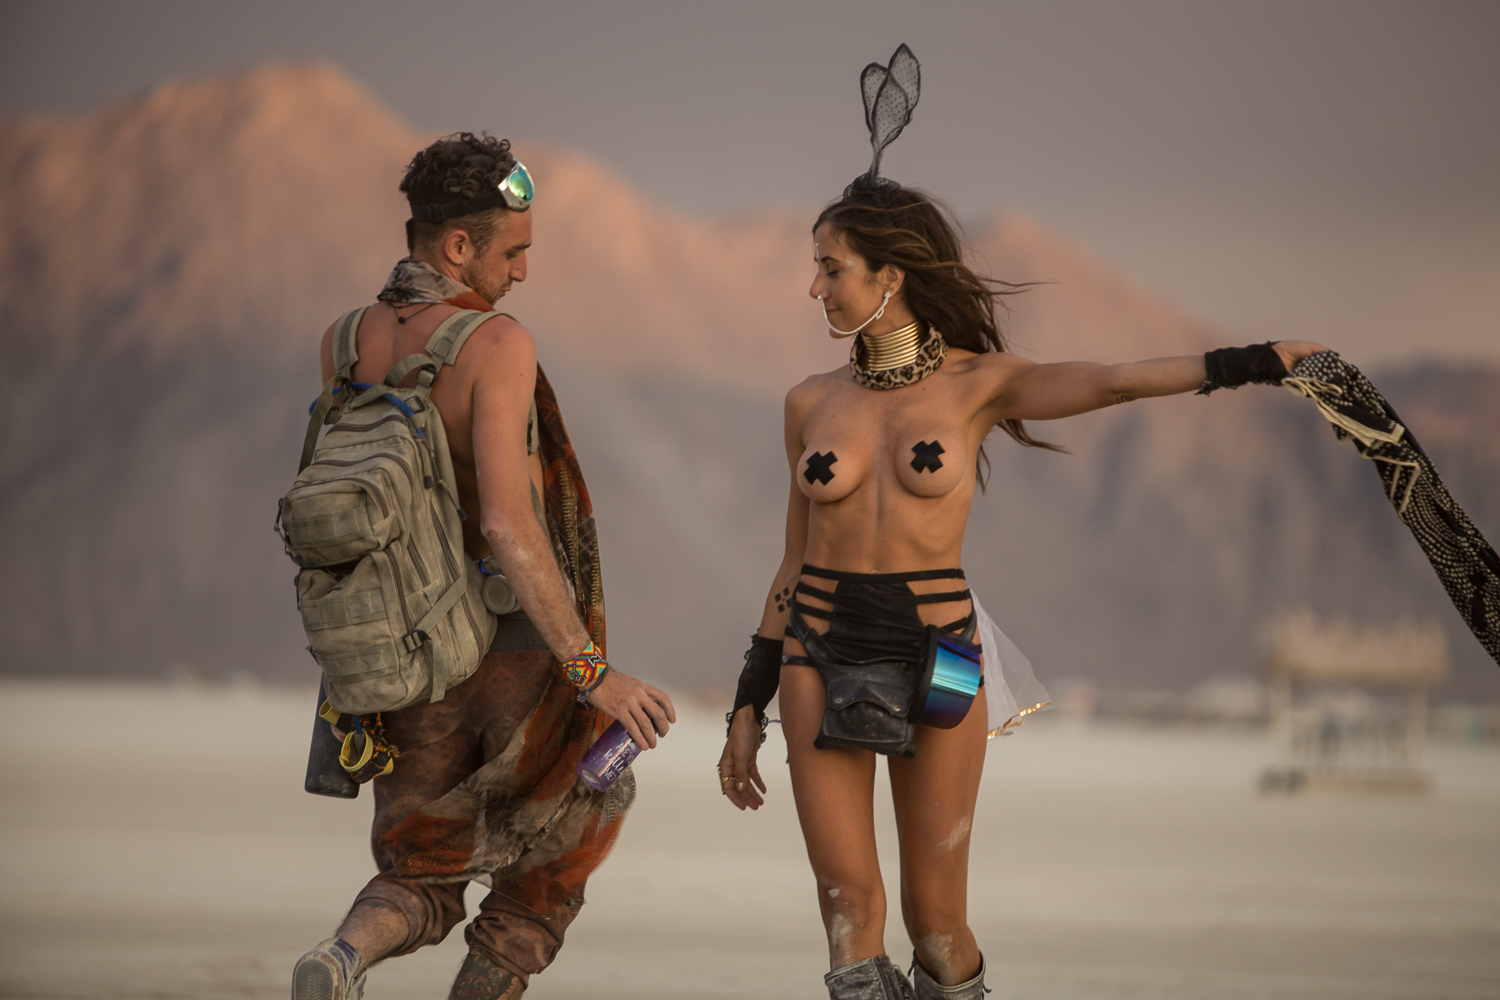 Naked and bold: a gallery of the hottest men at burning man